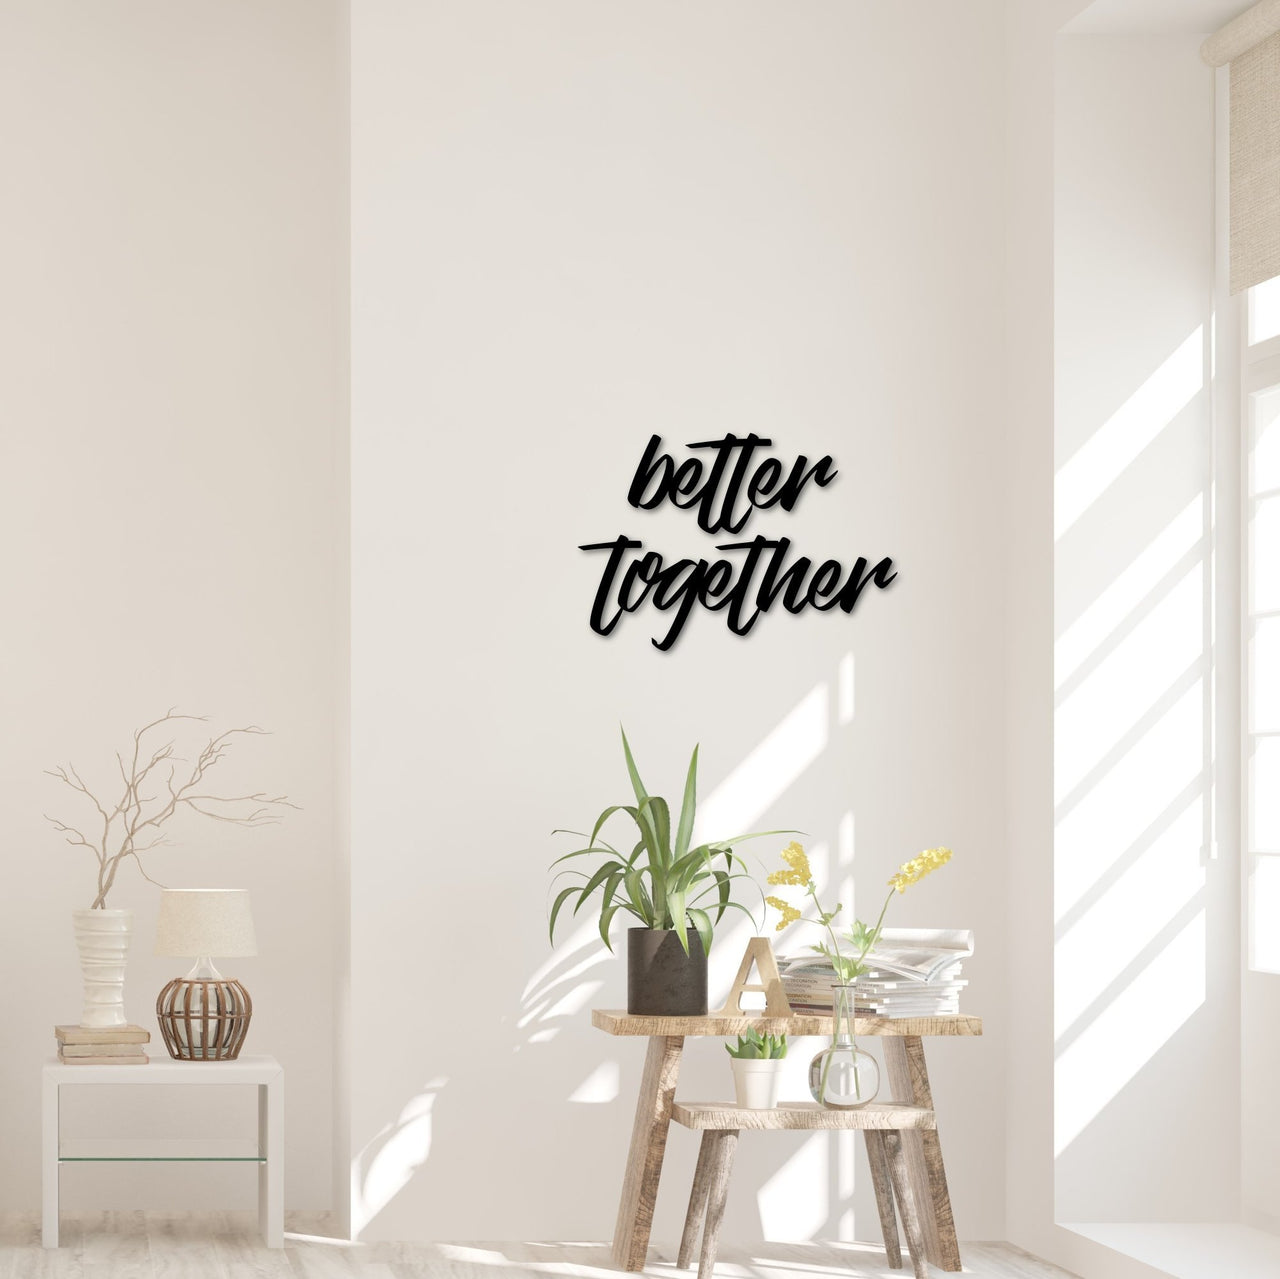 Better Together Sign | Wedding Decor Chair Signs | Bride and Groom Romantic Sign | Metal Wall Decor | Mr and Mrs Wedding Gift | Love Decor